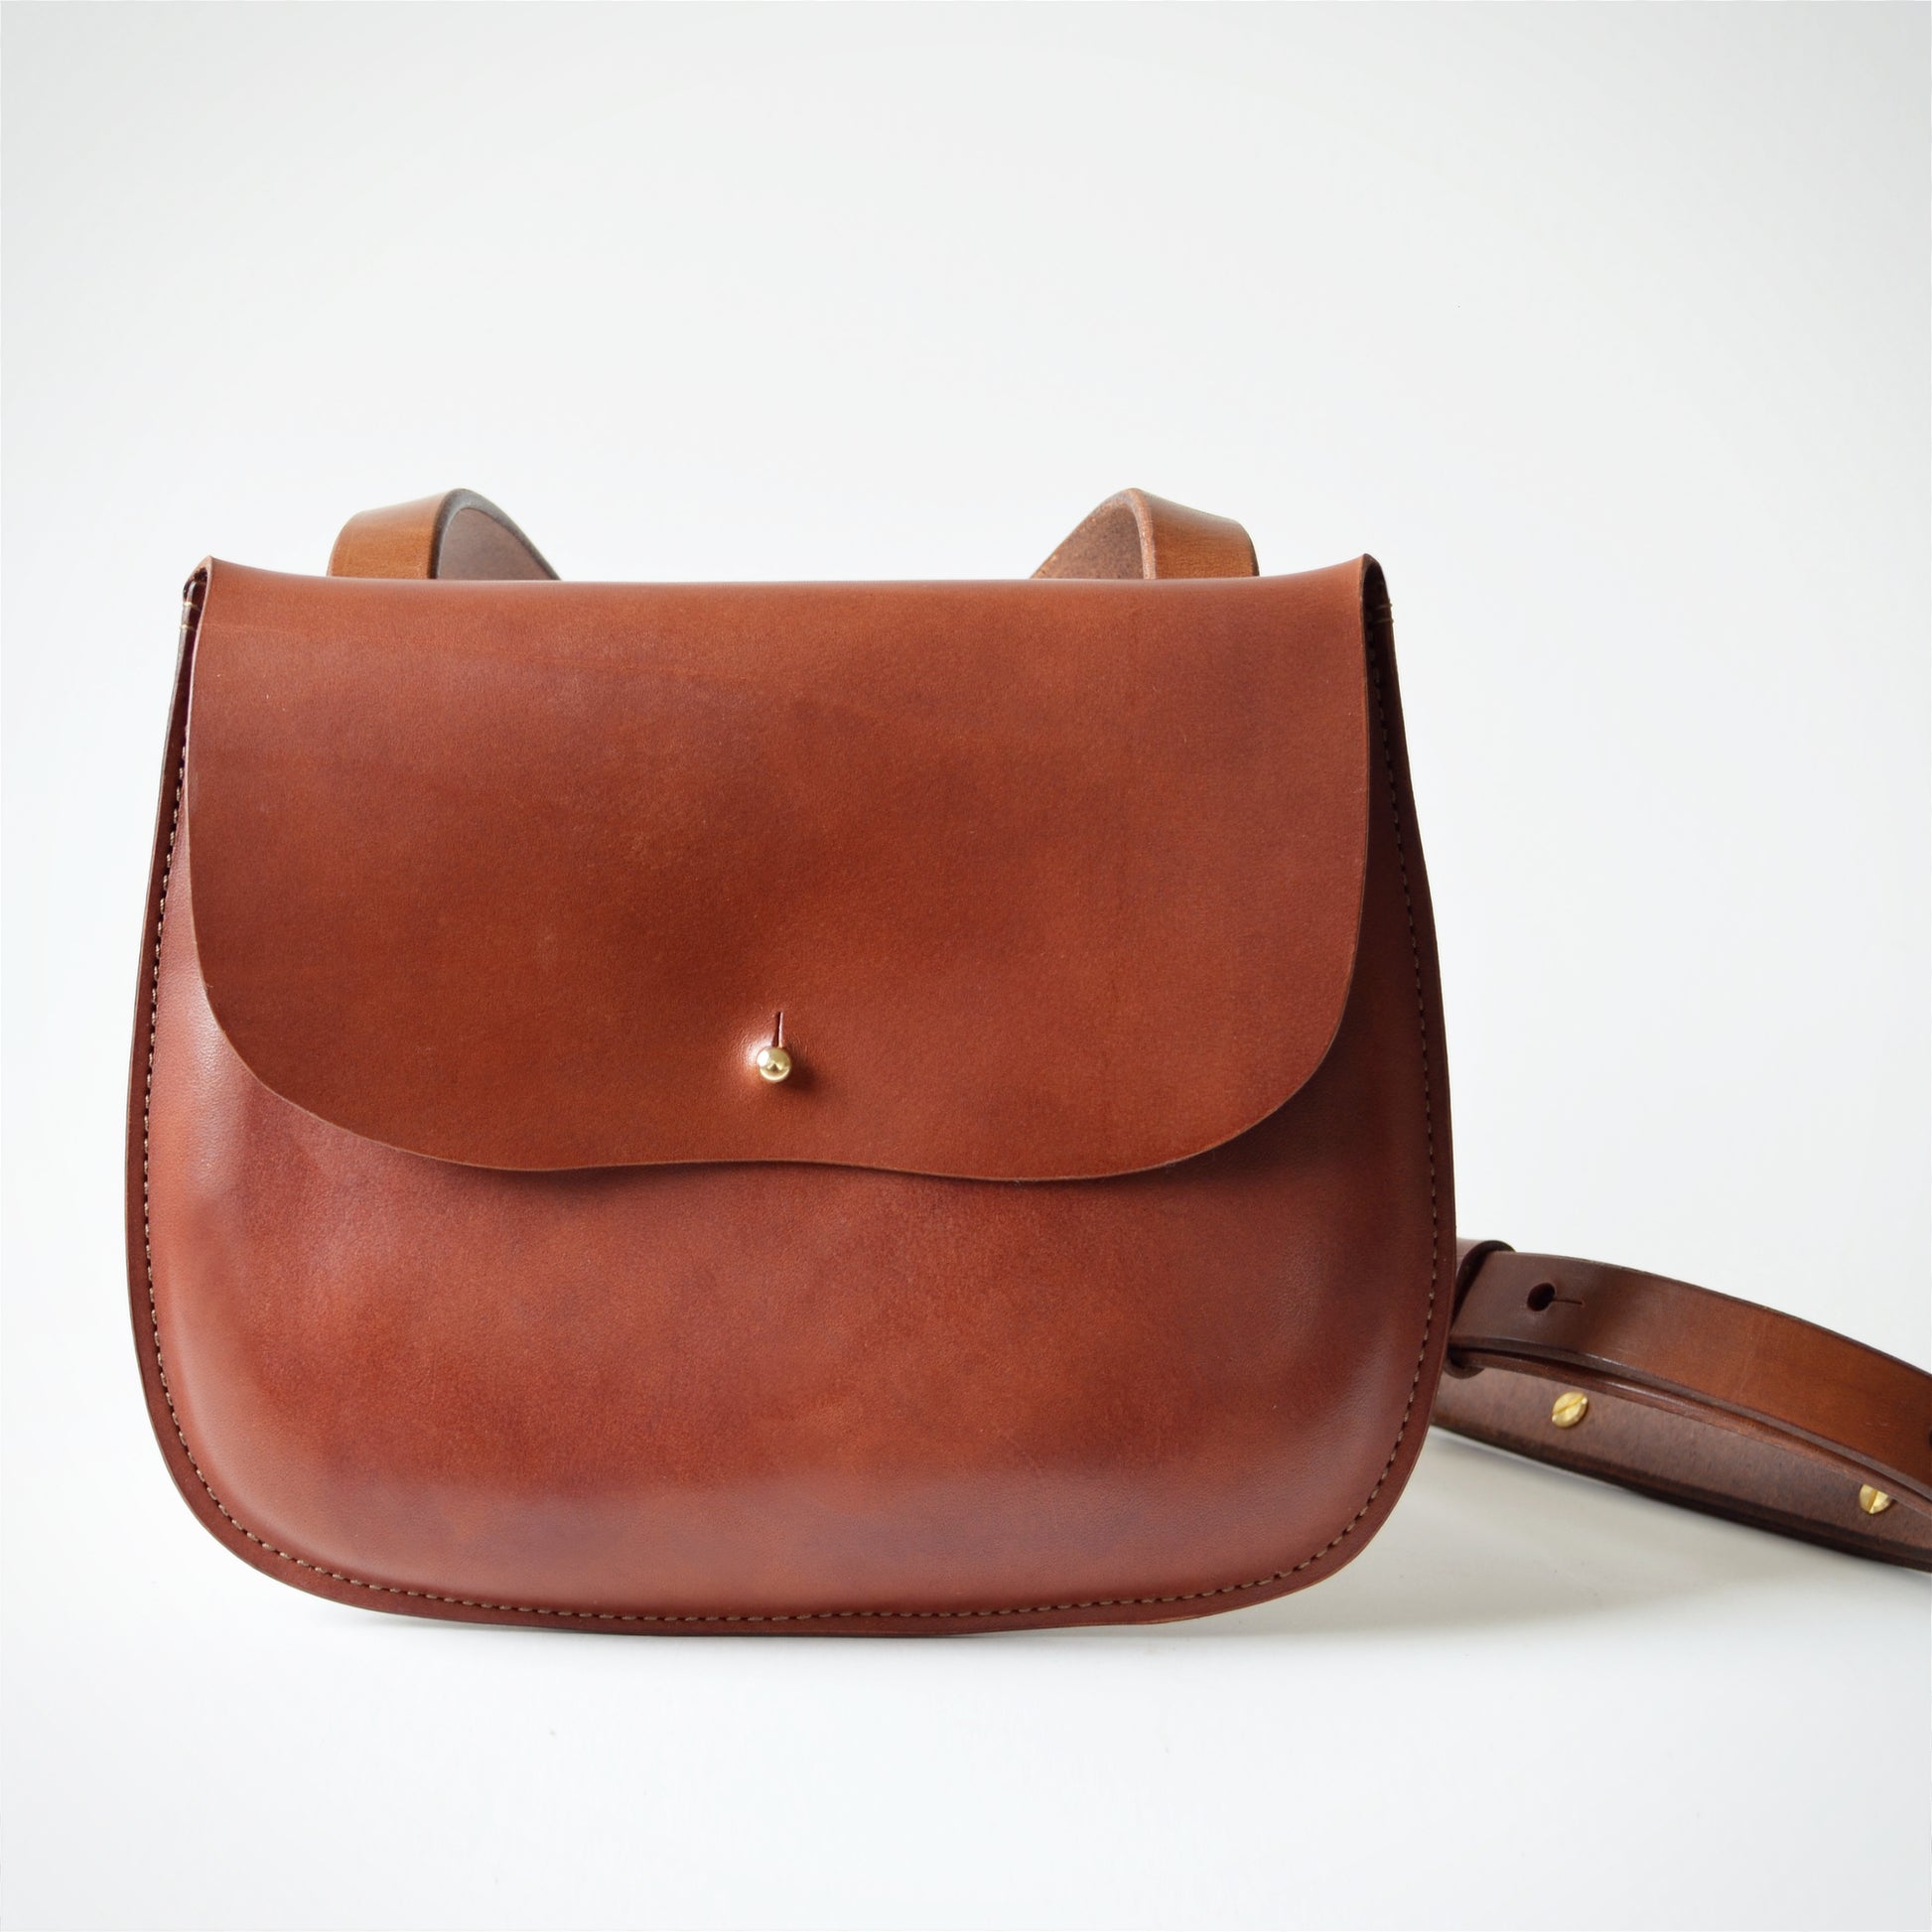 A medium brown color crossbody bag sits on a white surface with the strap looped to the side.